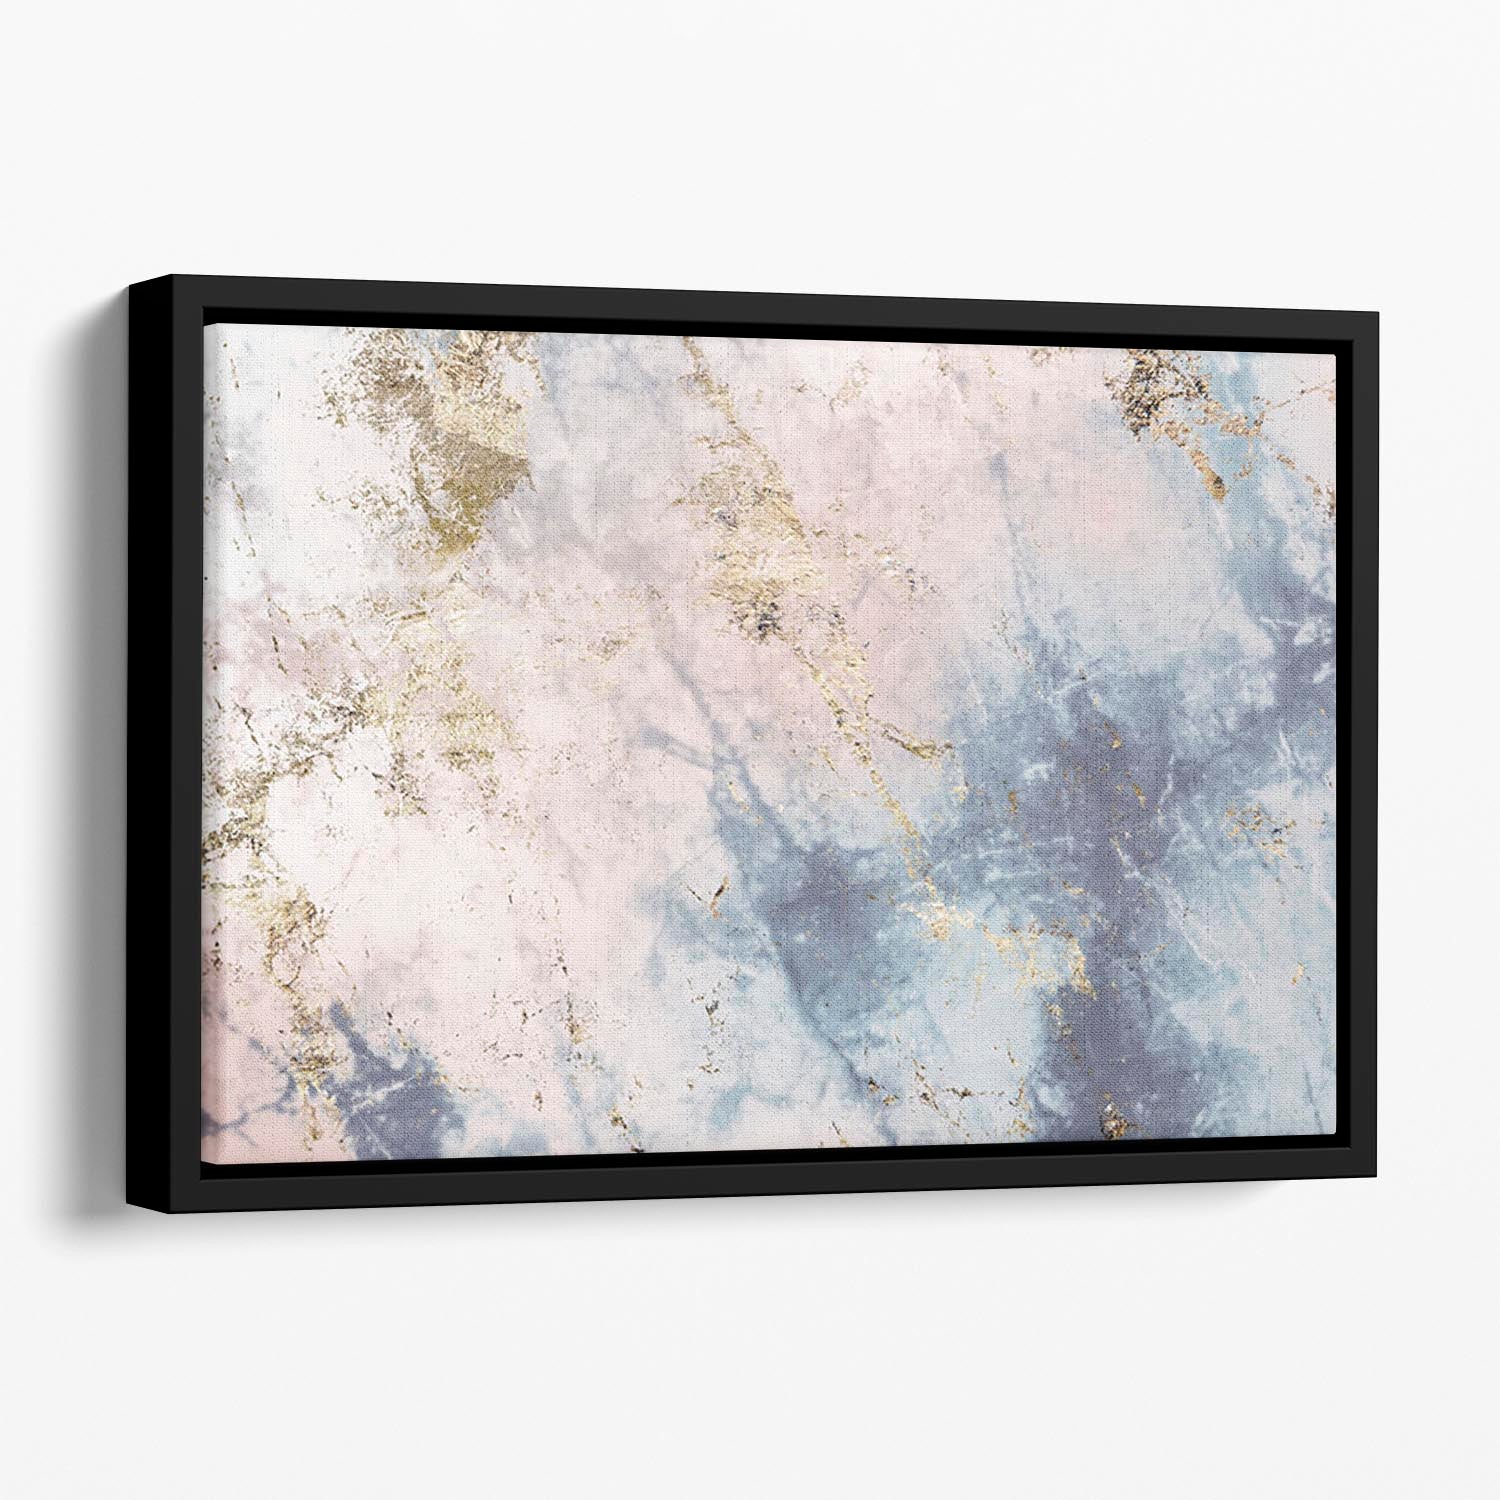 Faded Marble Floating Framed Canvas - Canvas Art Rocks - 1